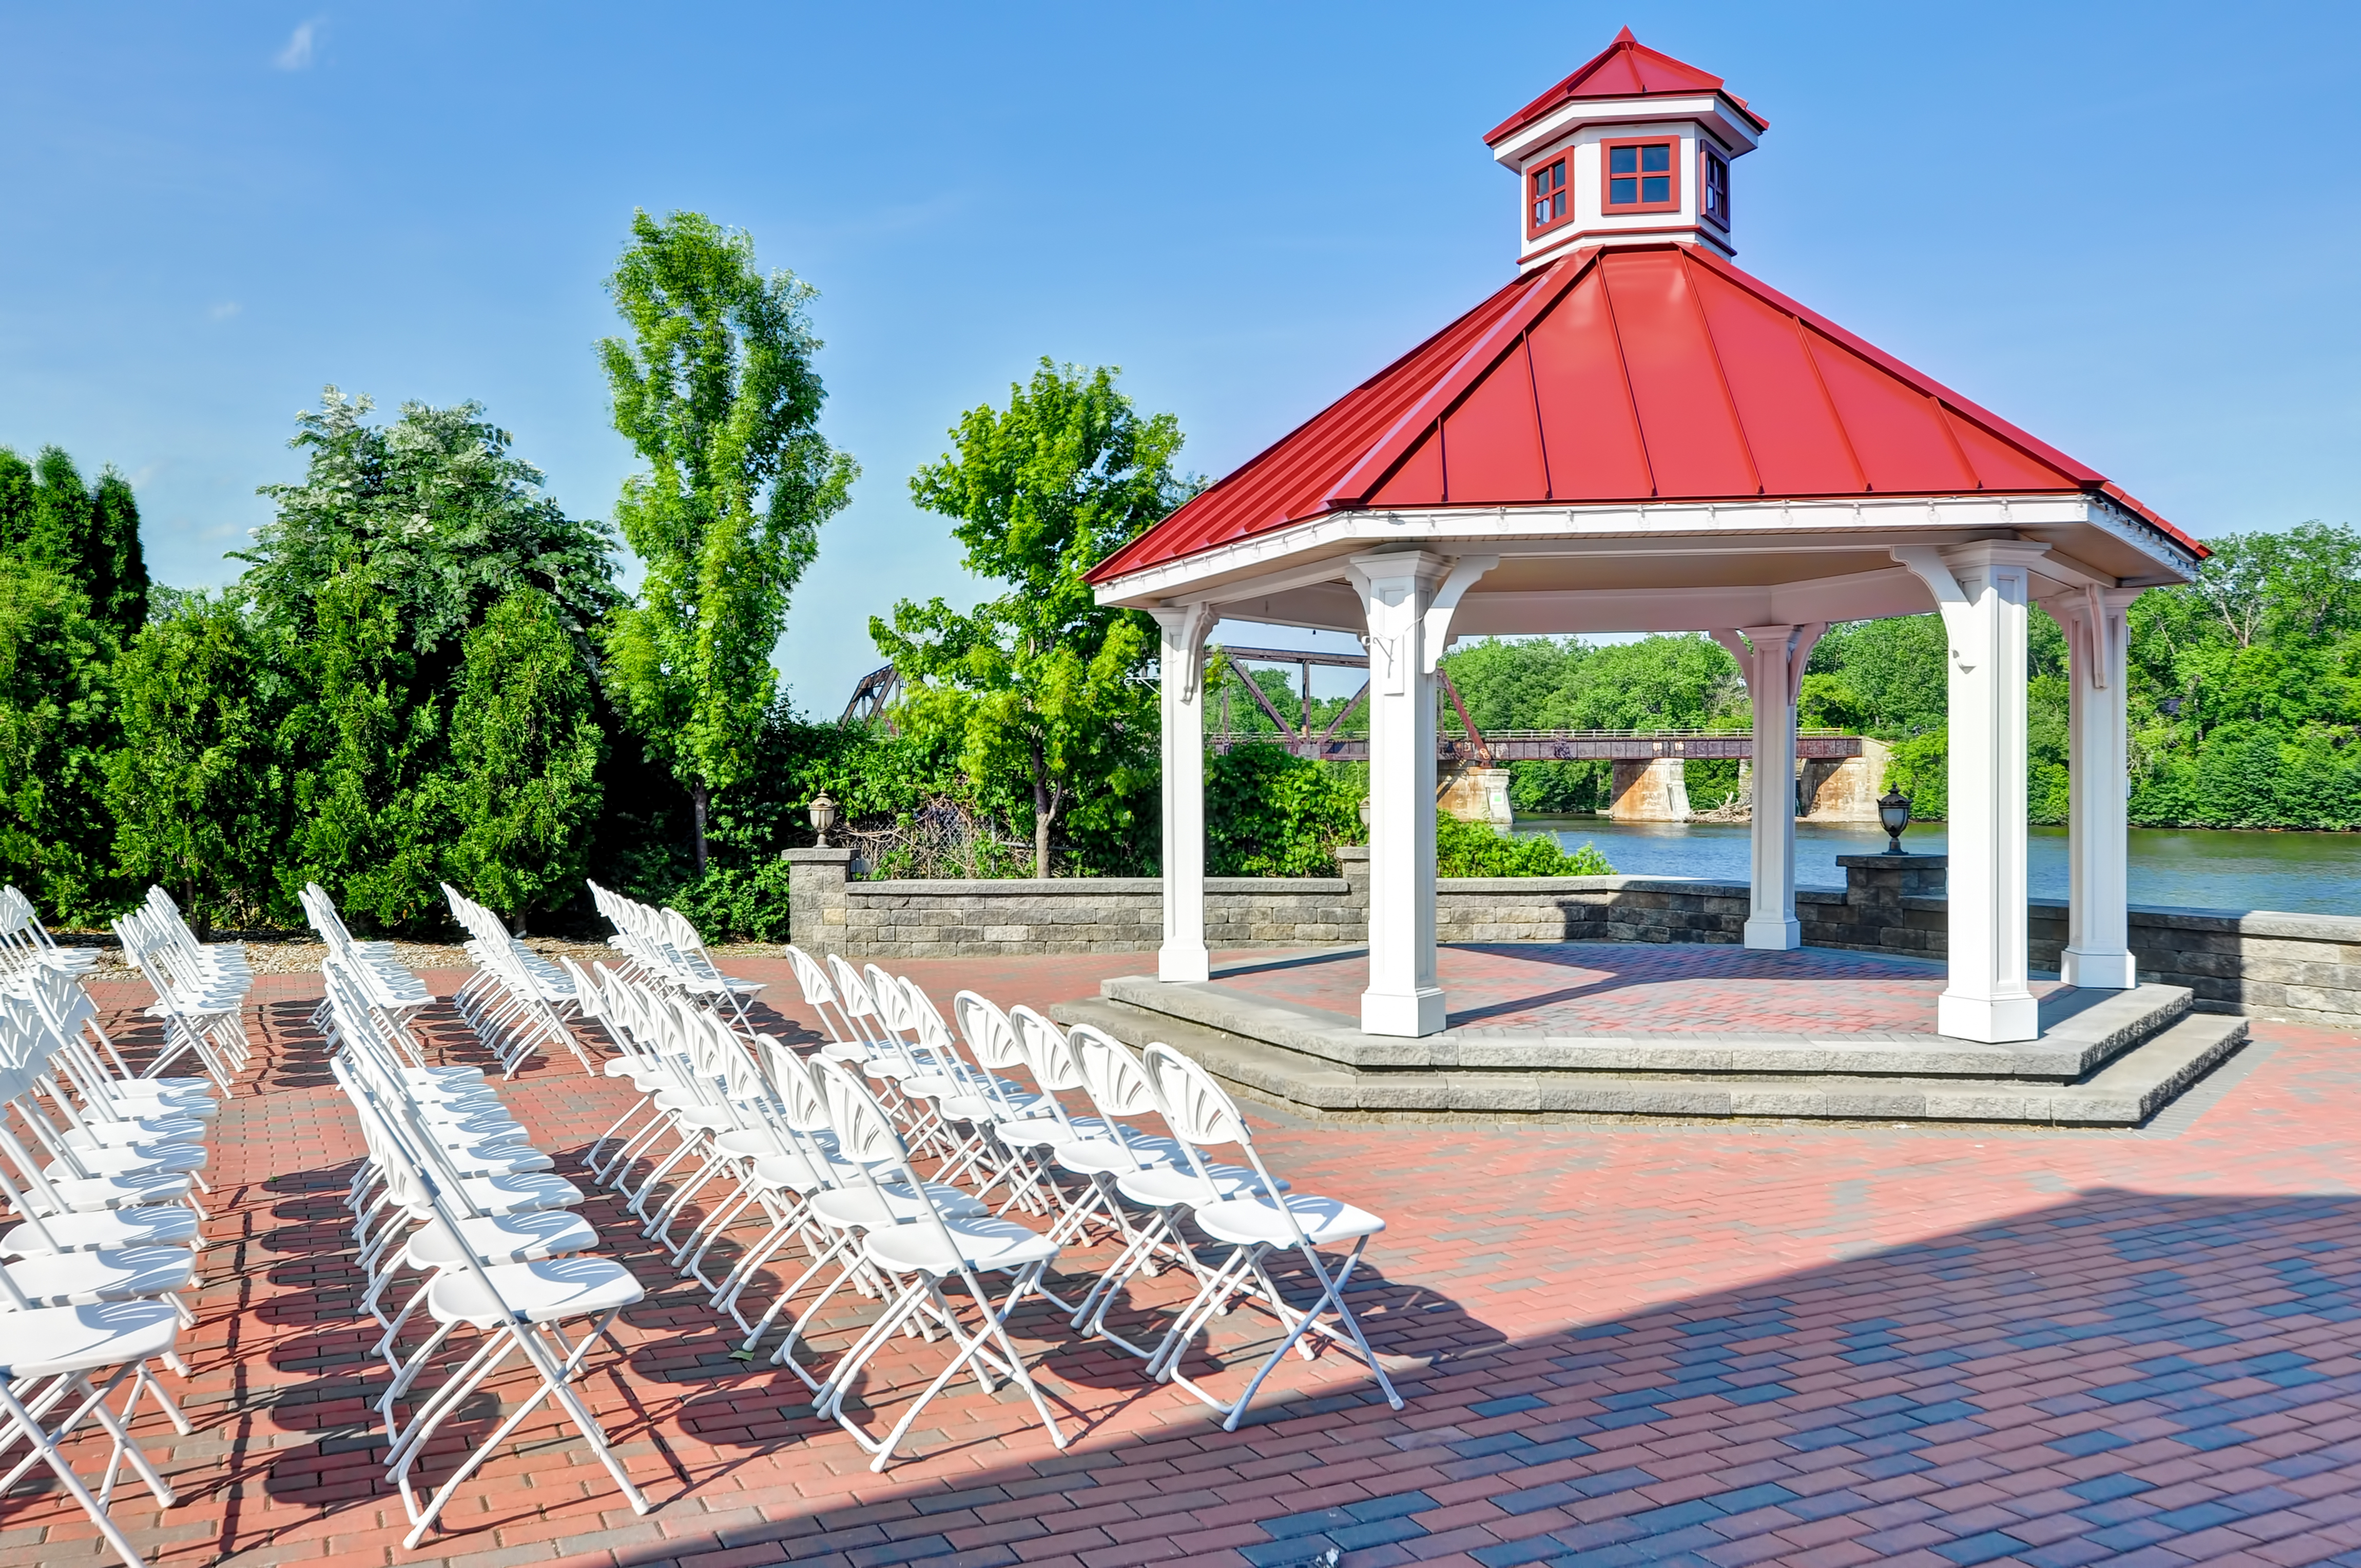 Outdoor Event Space Gazebo and Seating